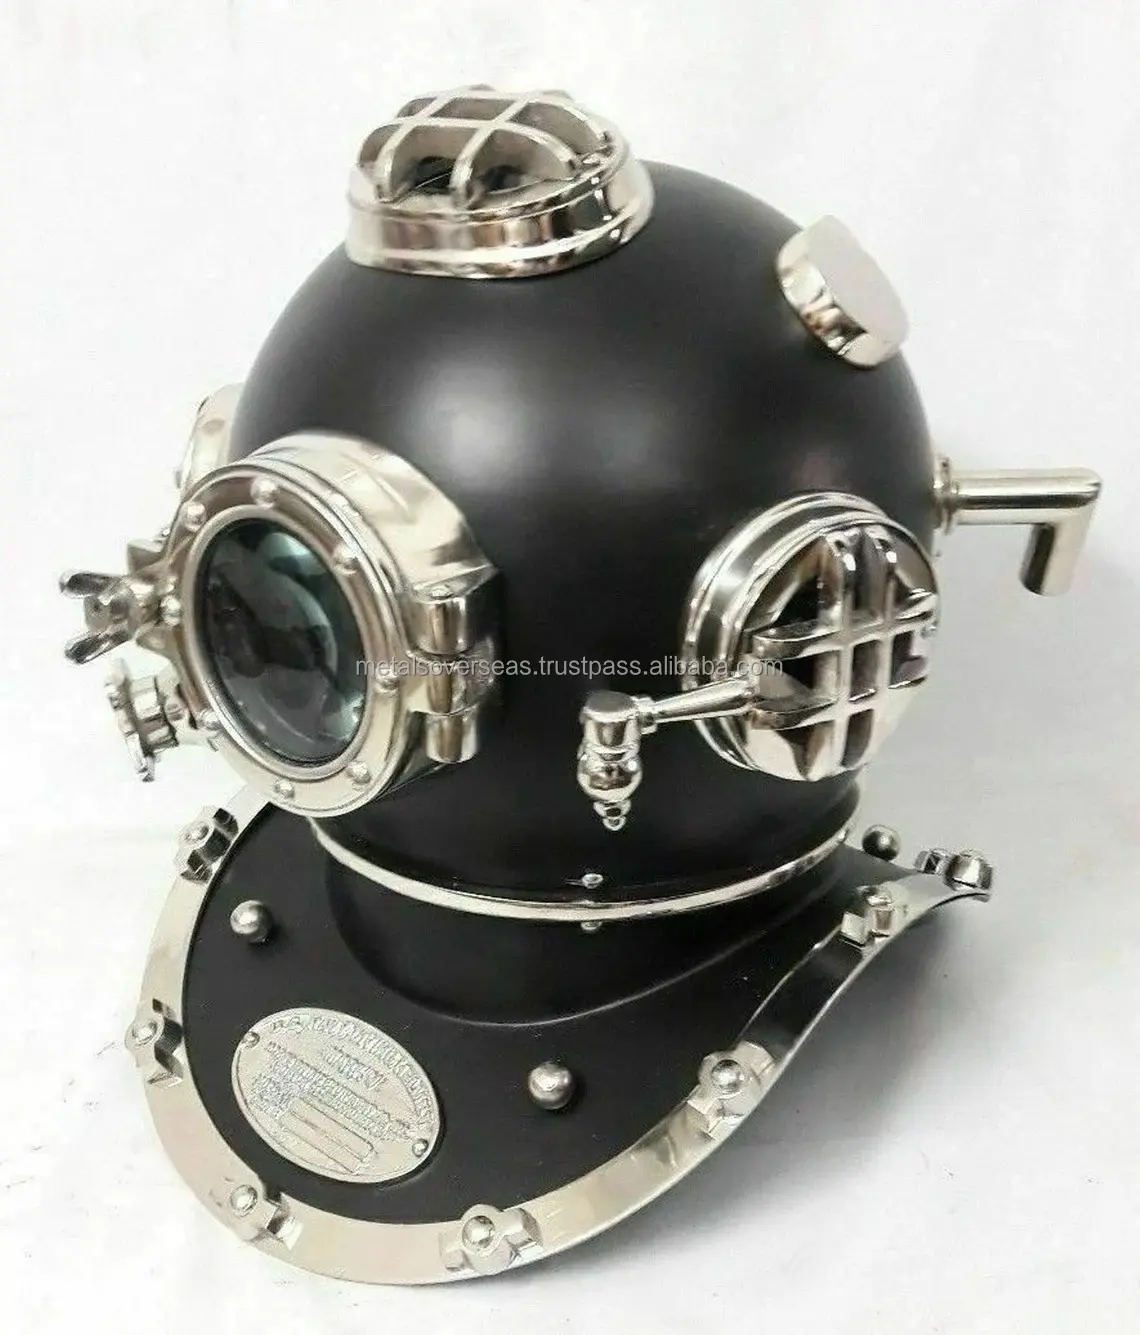 Divers Diving helmet Scuba Style US Navy Mark V Full size 18" Made By Metal Overseas